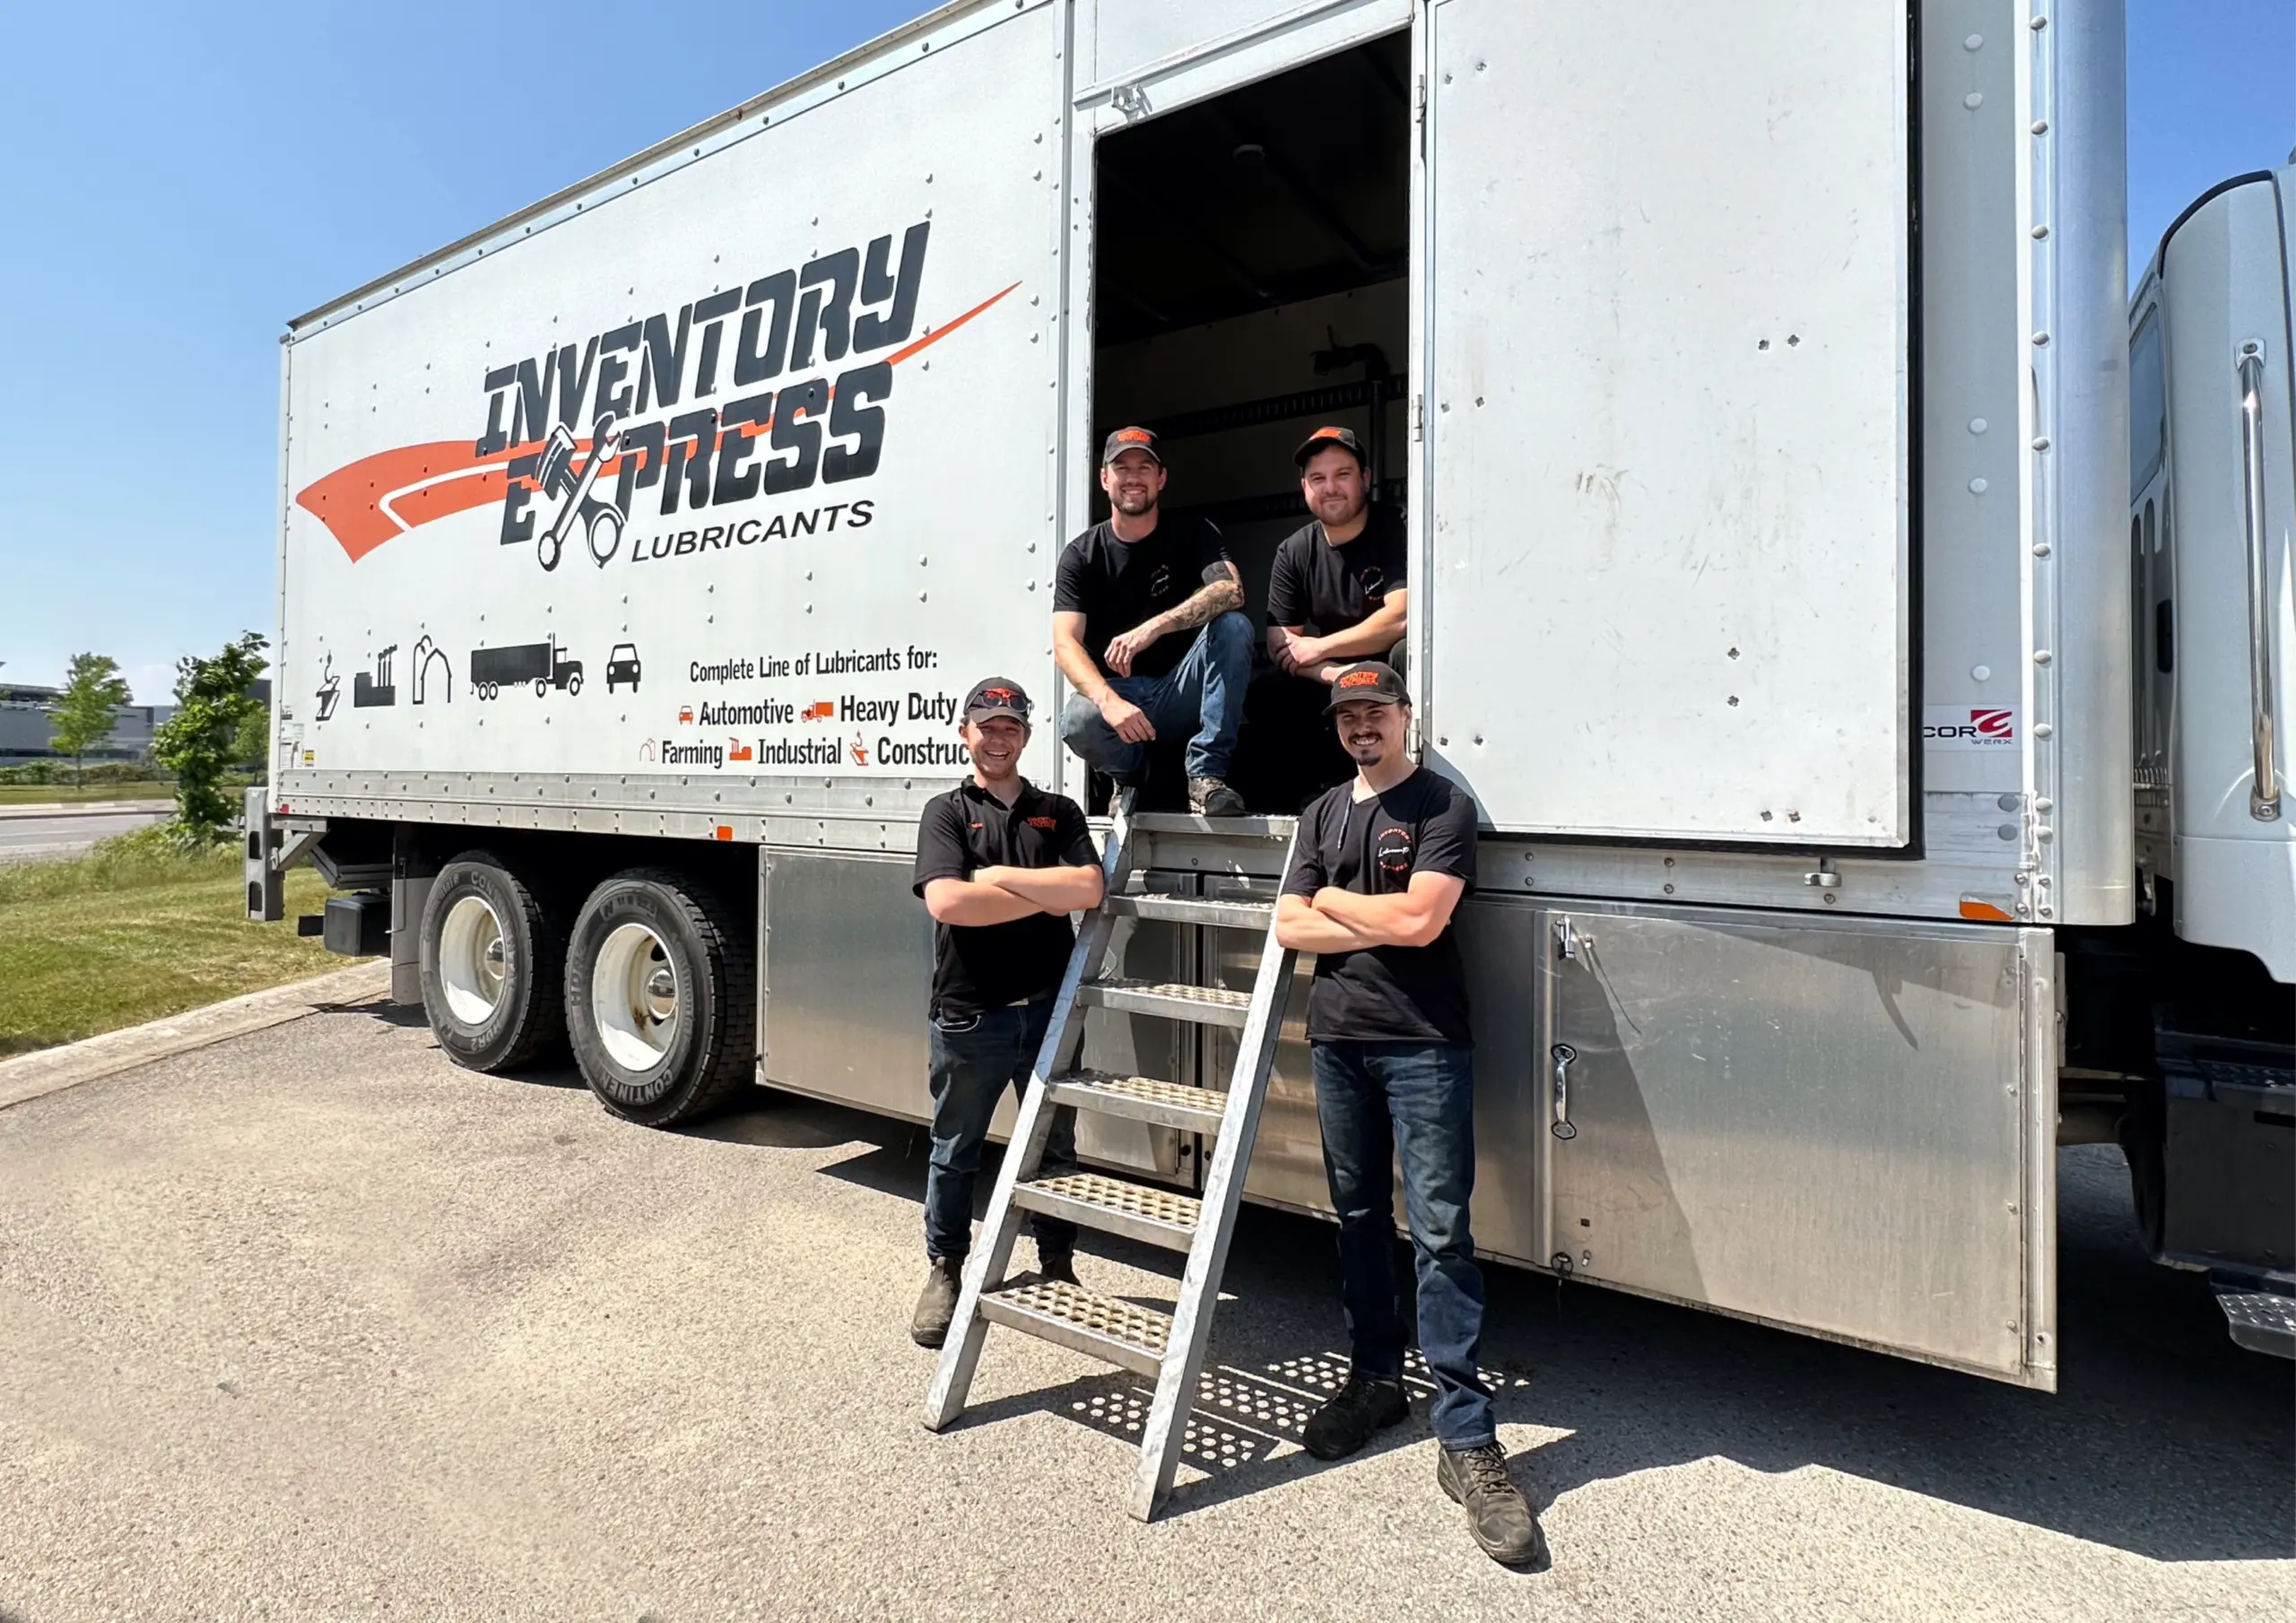 The Inventory Express team in front of a truck.